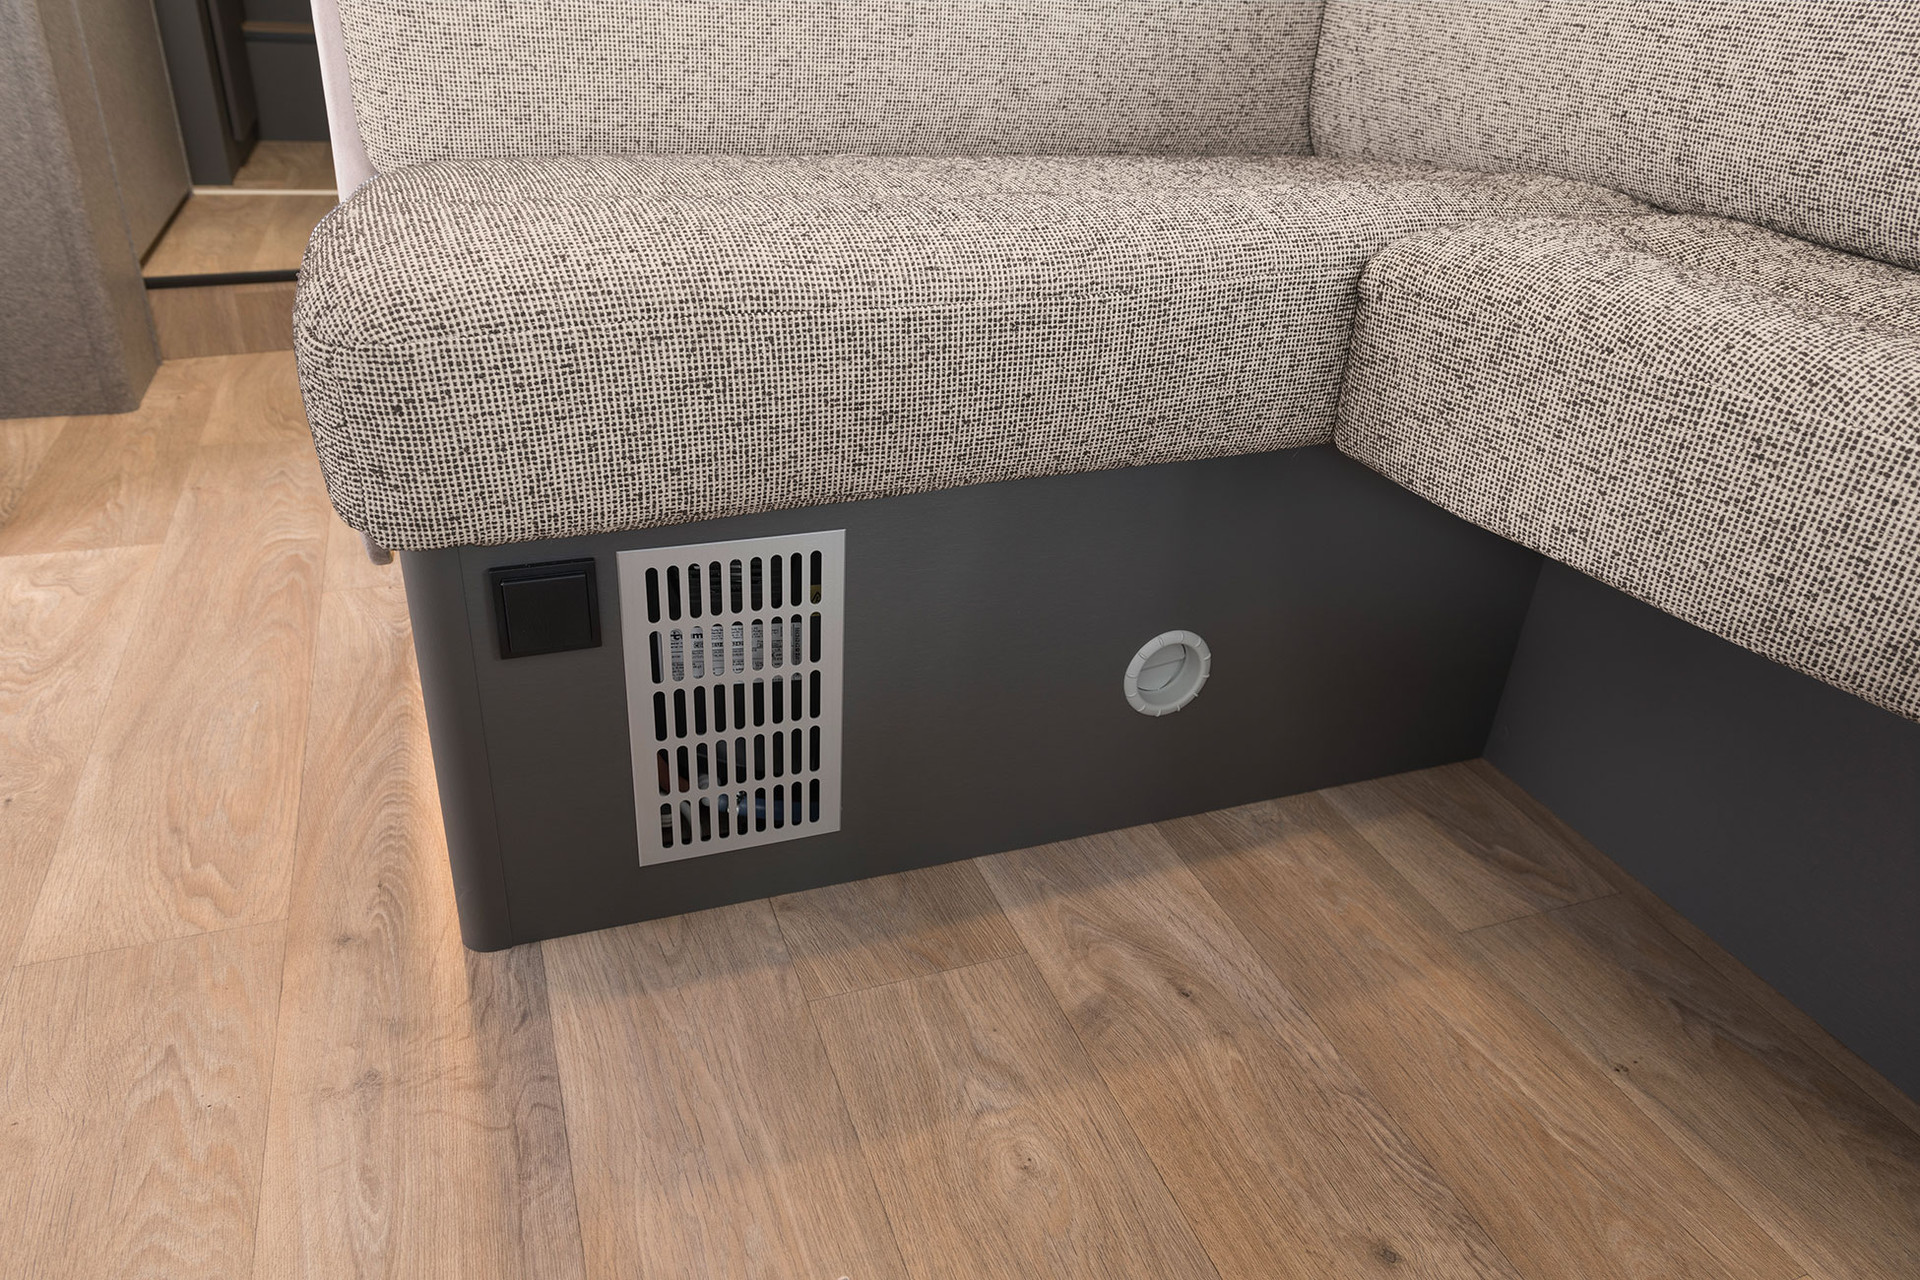 The heating is installed directly in the seating lounge, allowing the use of shorter pipes for perfect heating performance. The frost monitor valve is easily accessible via the kitchen cabinet.